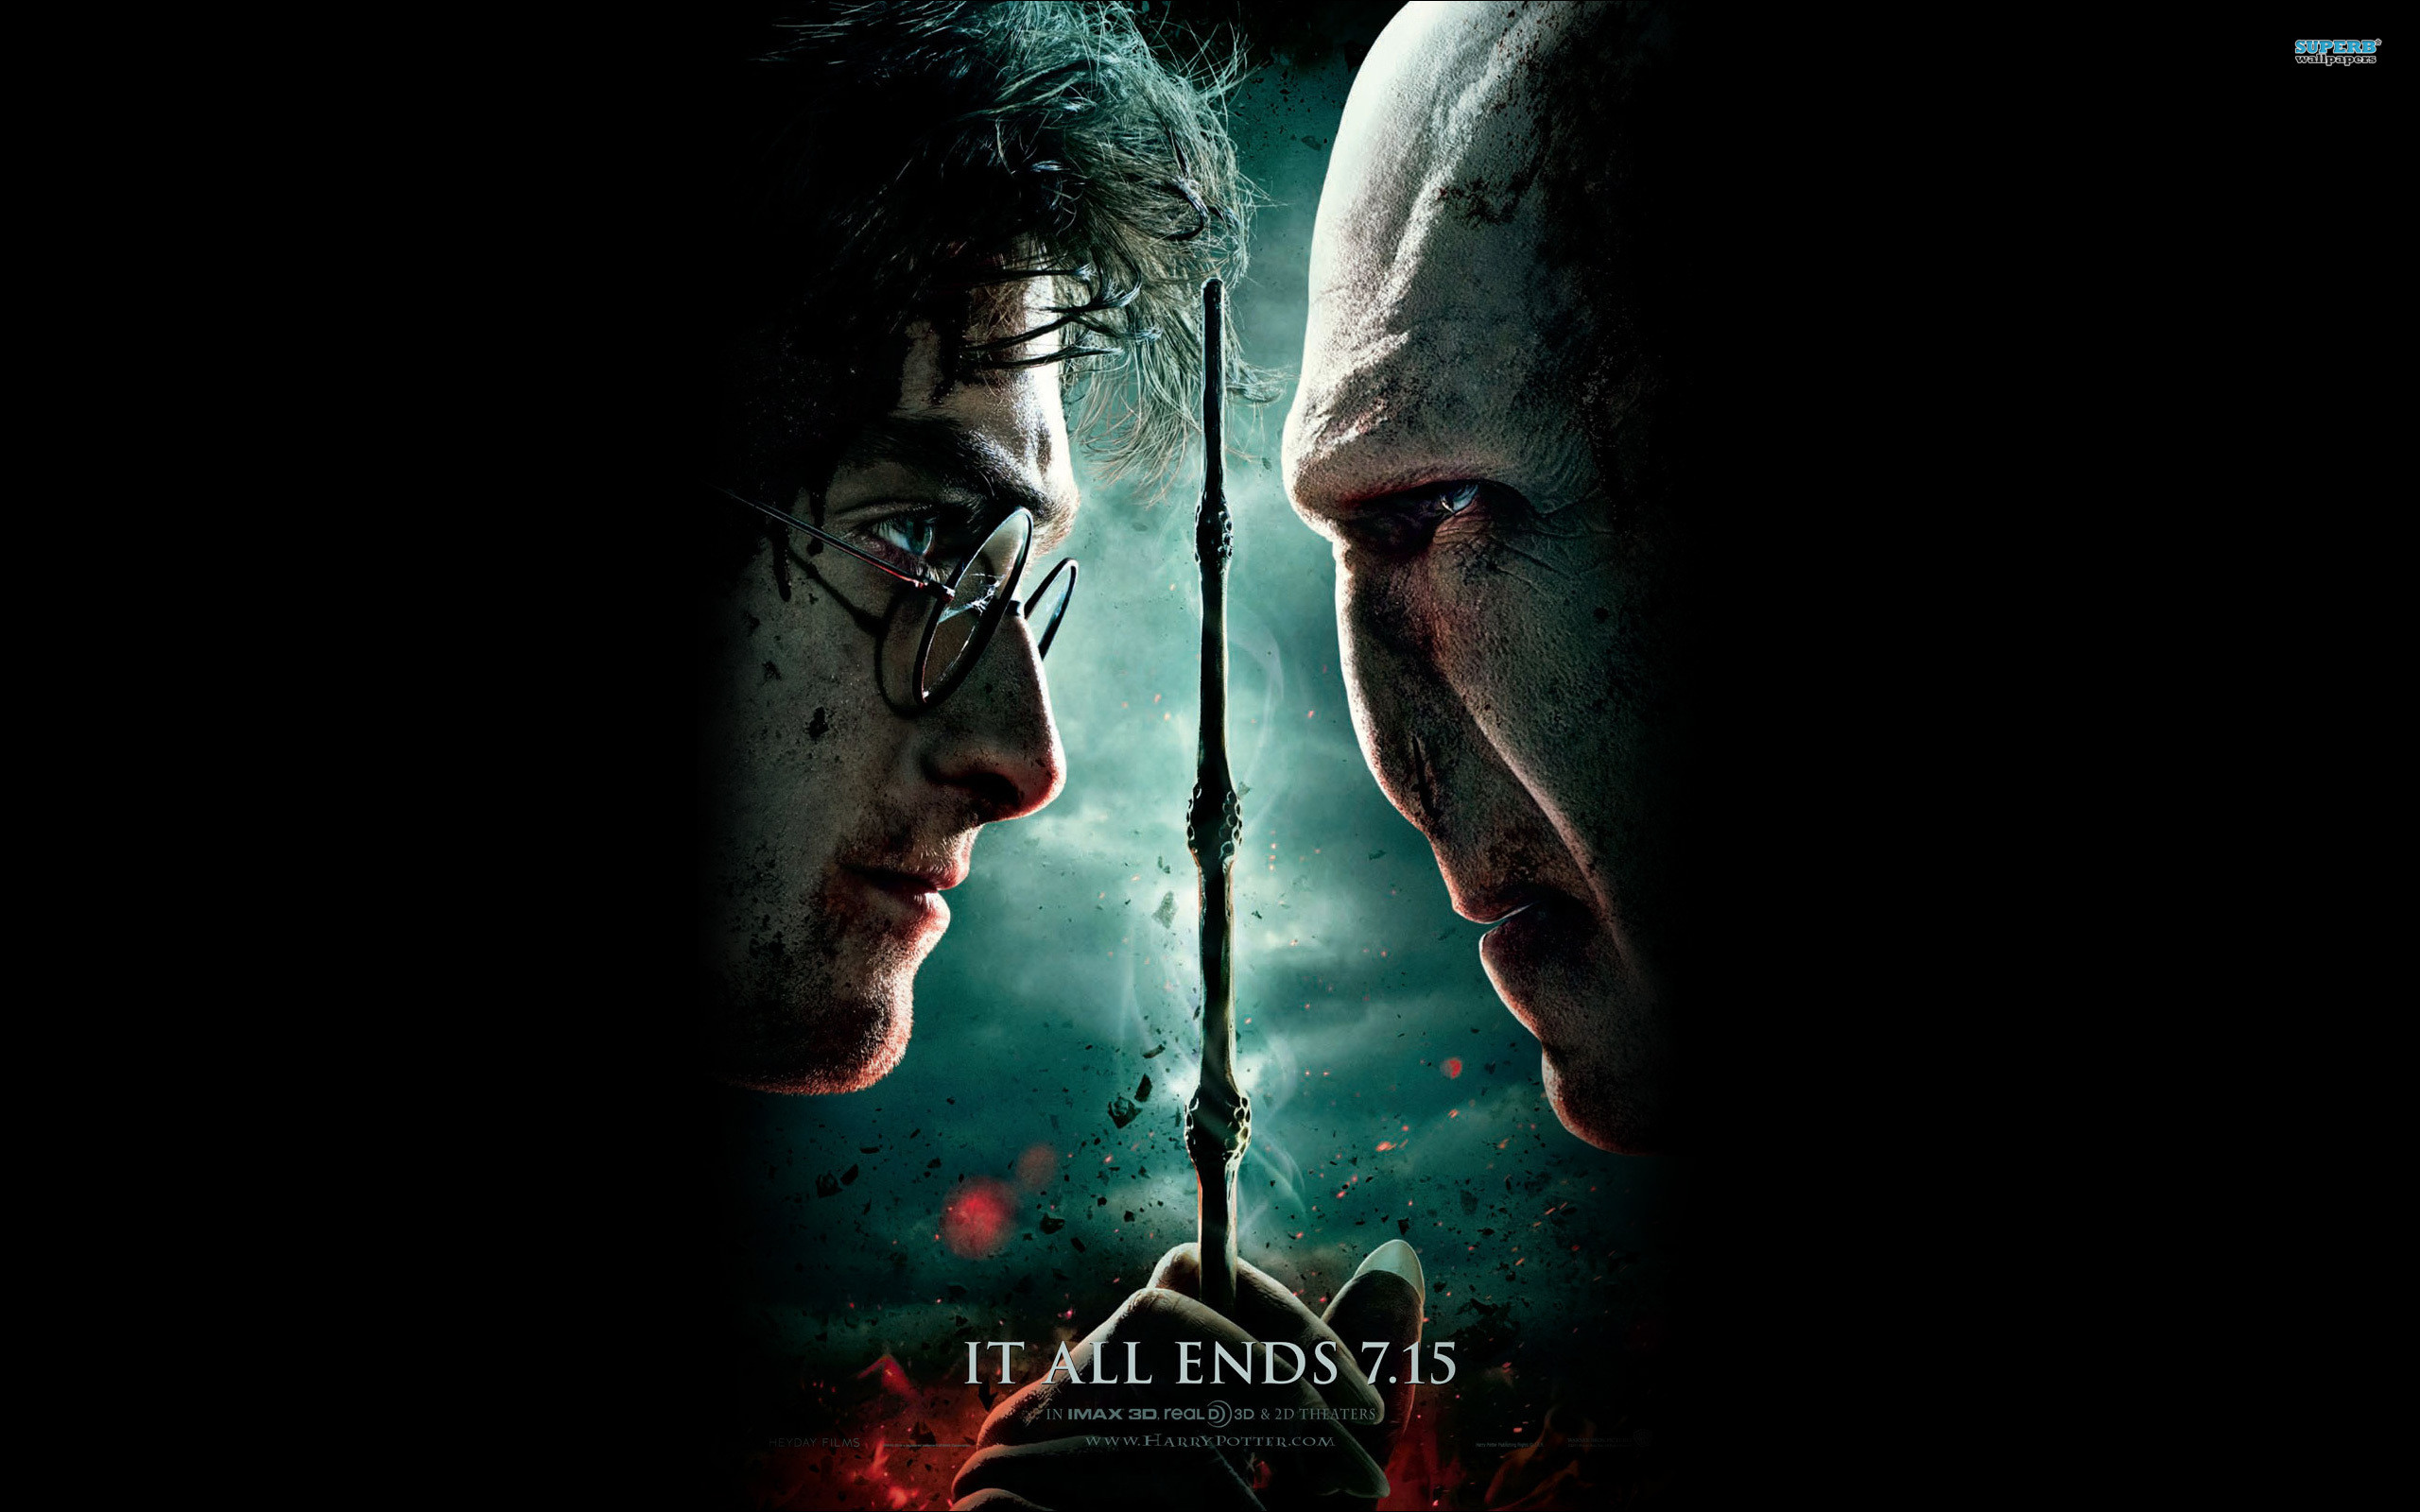 2560x1600 Harry Potter And The Deathly Hallows Part 2 Wallpapers - Wallpaper .